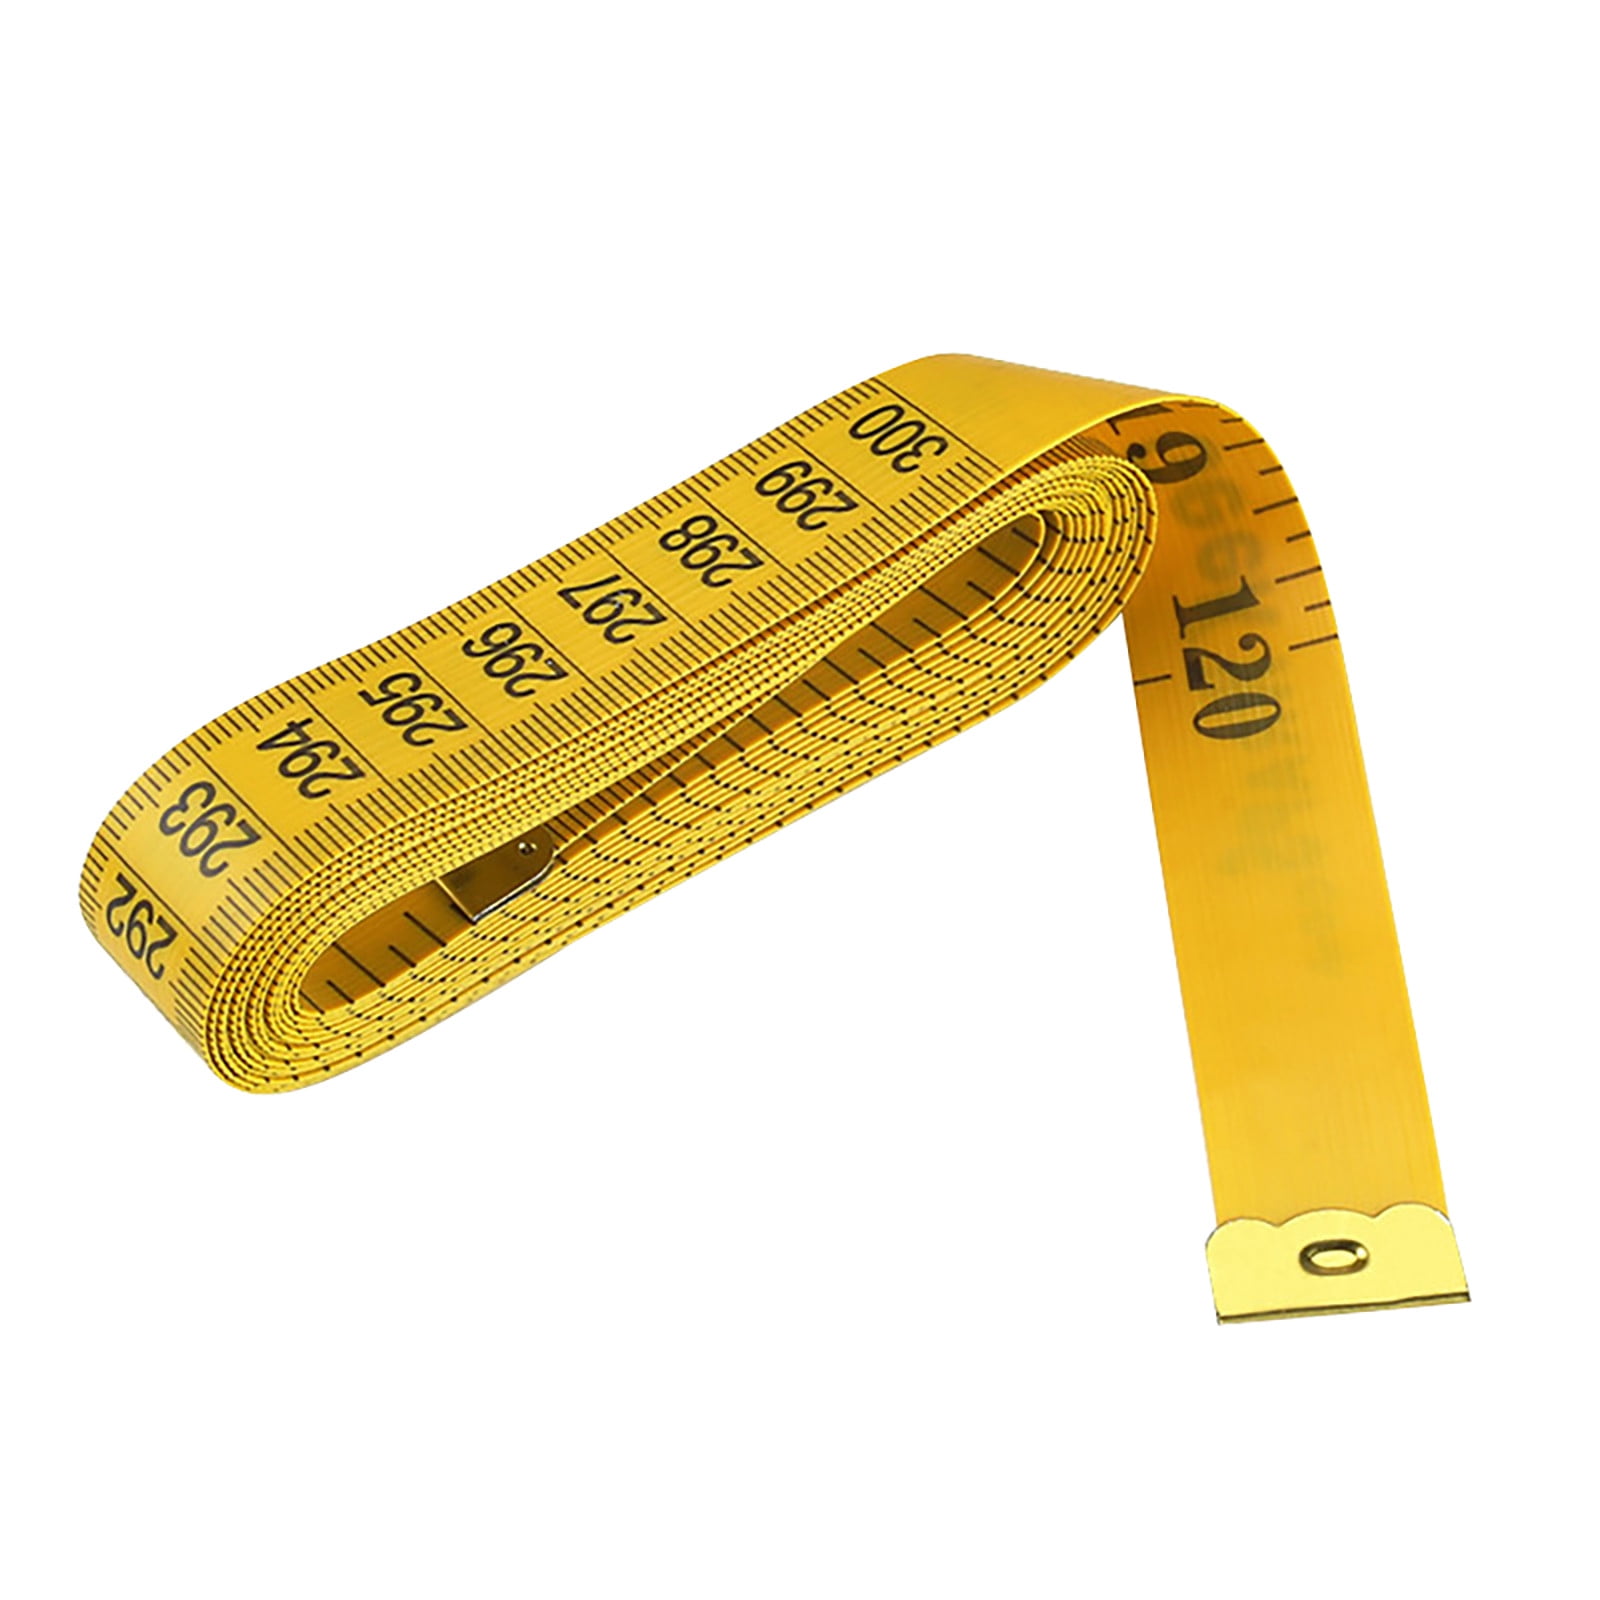 absuyy The Towel on Clearance- DIY Tailor's Clothing Measuring Tape inch  Cloth Ruler Soft Tape 60 inch/300CM